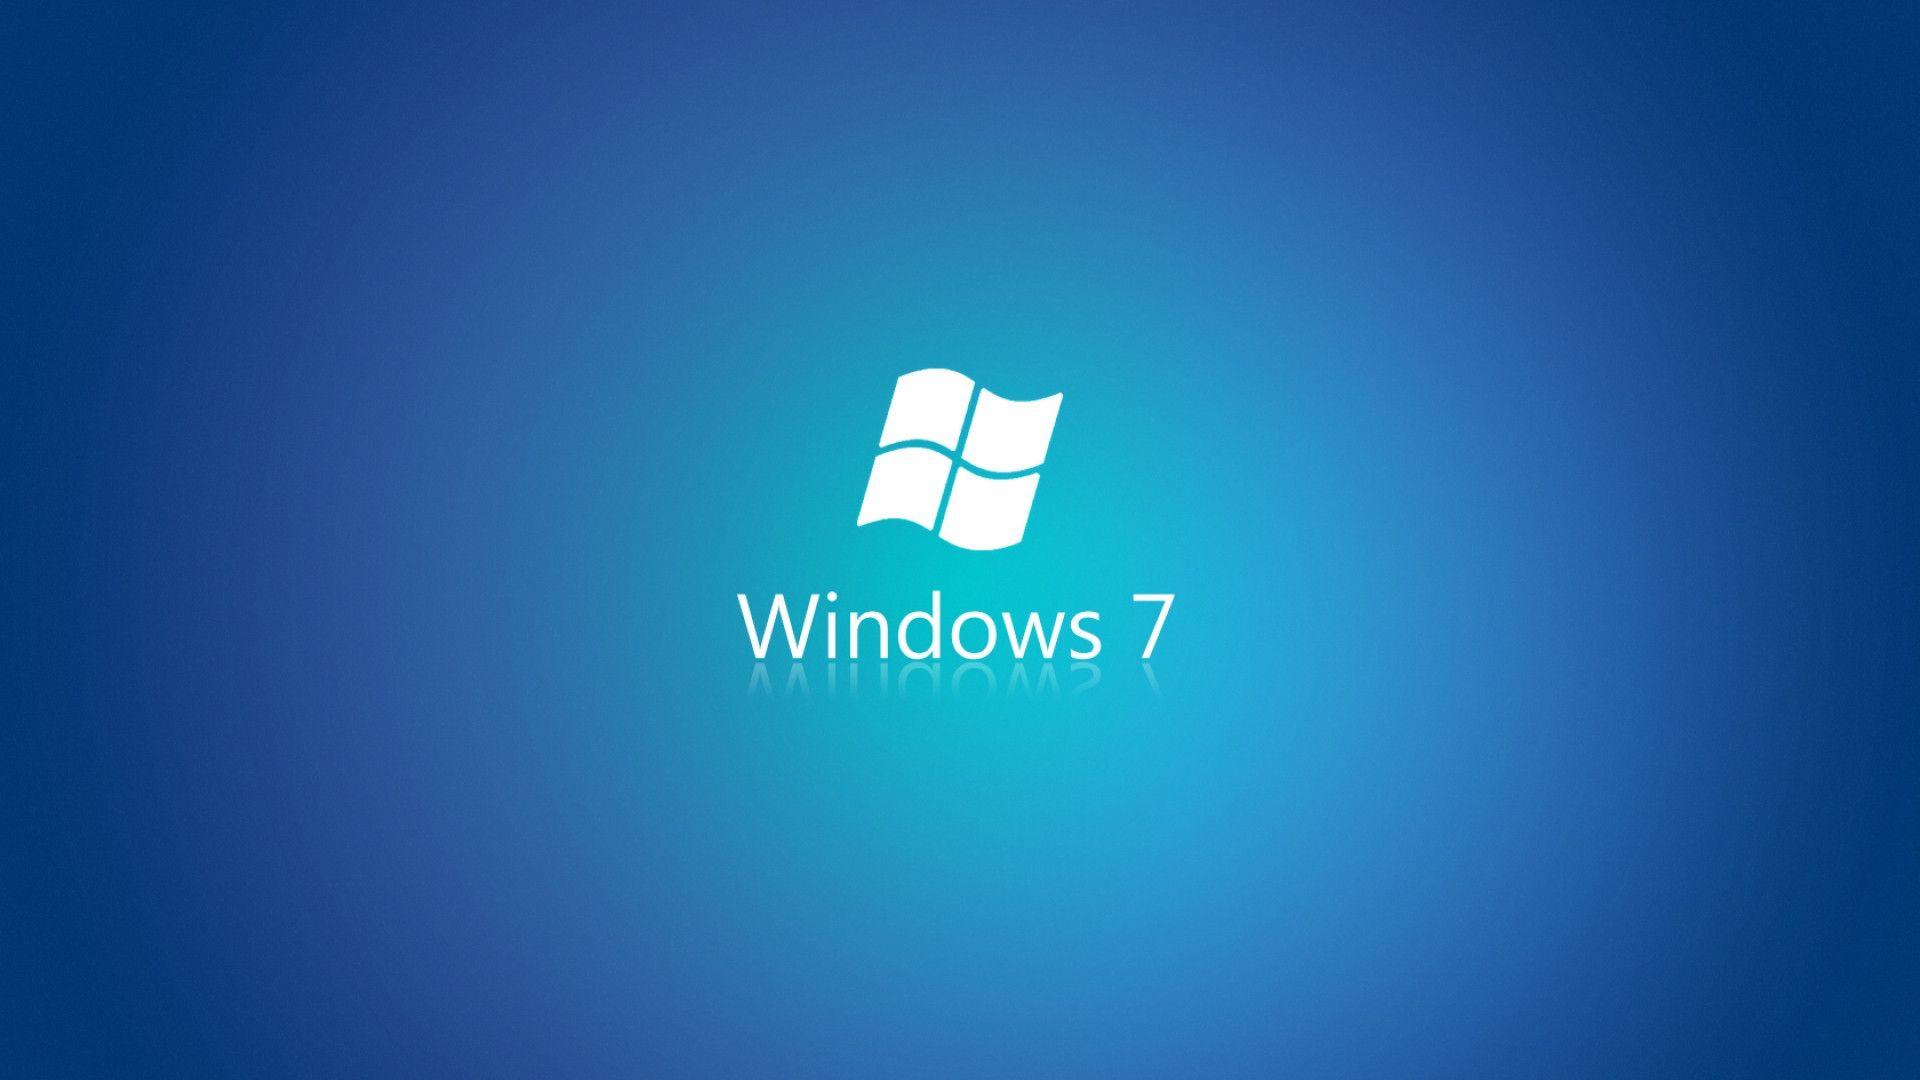 Free White Windows Logo Wallpapers & HD pictures